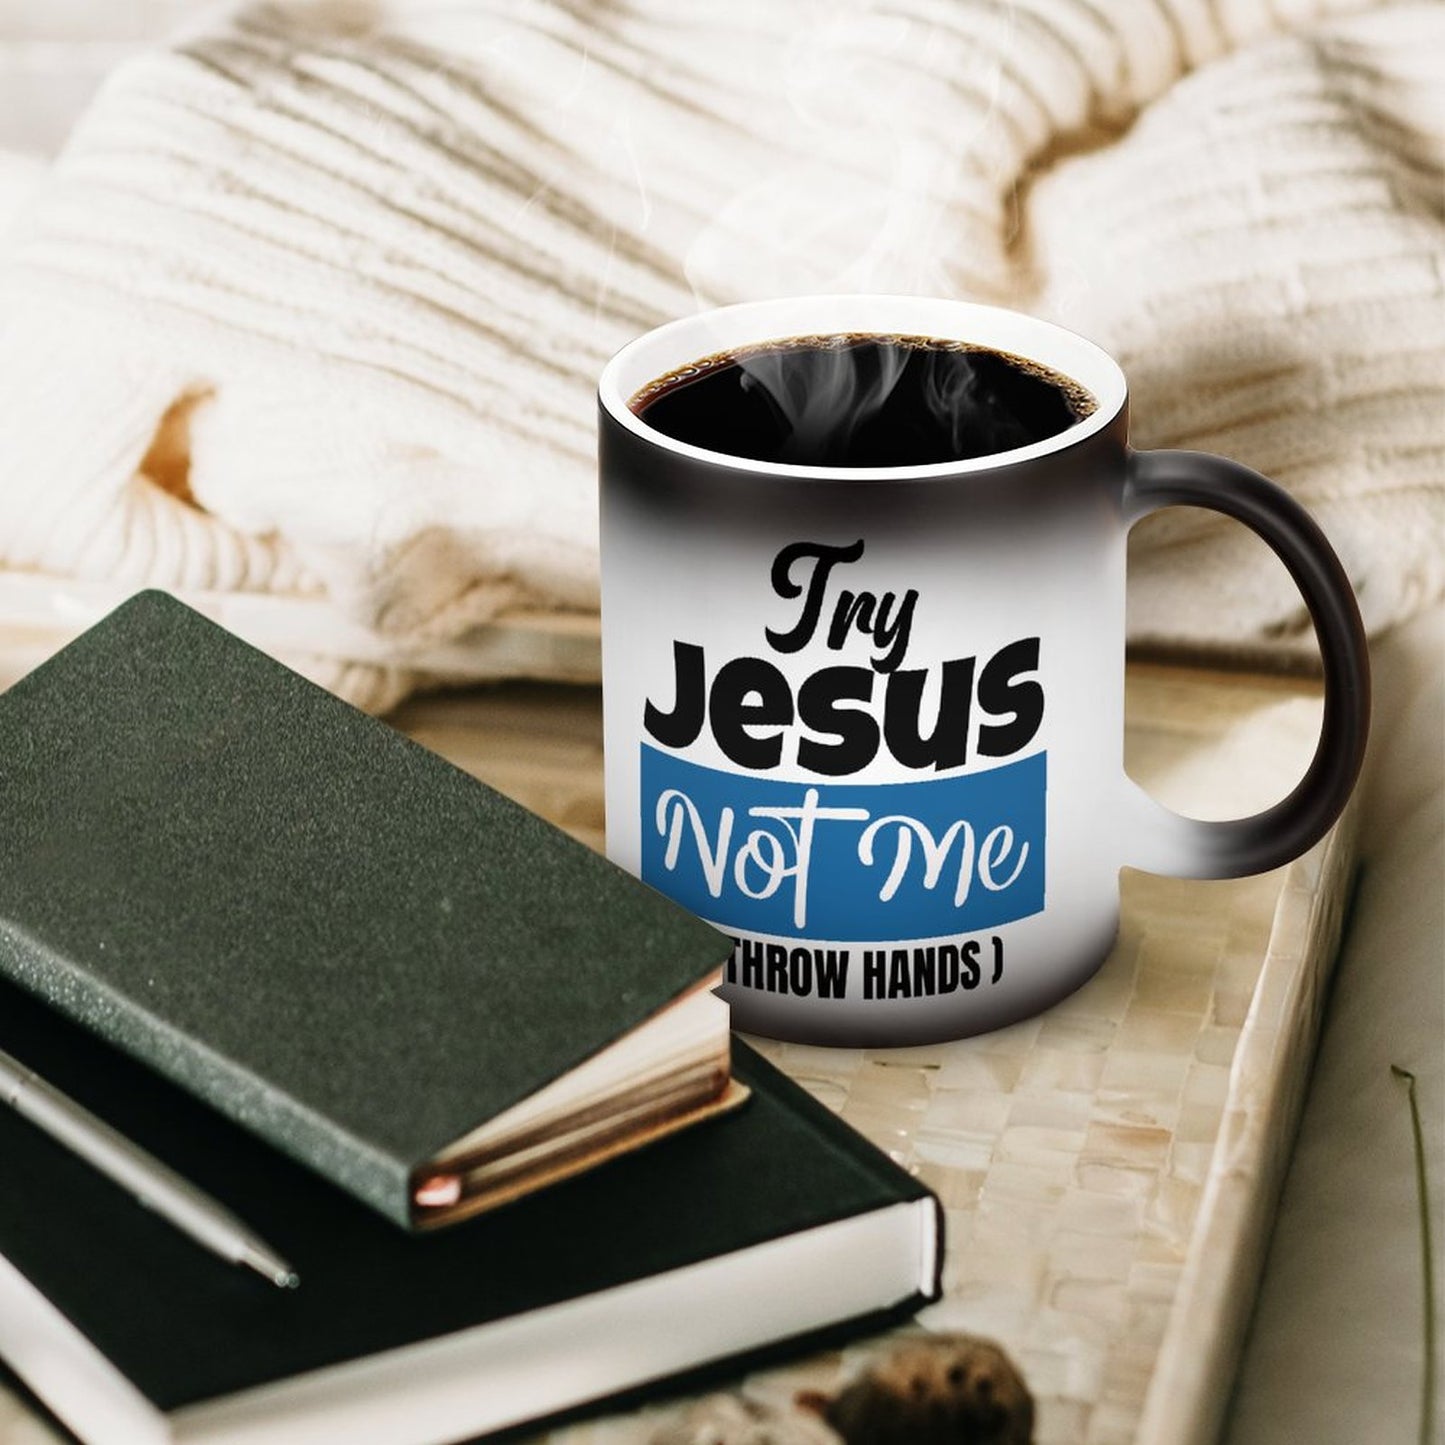 Try Jesus Not Me I Throw Hands Funny Christian Color Changing Mug (Dual-sided)